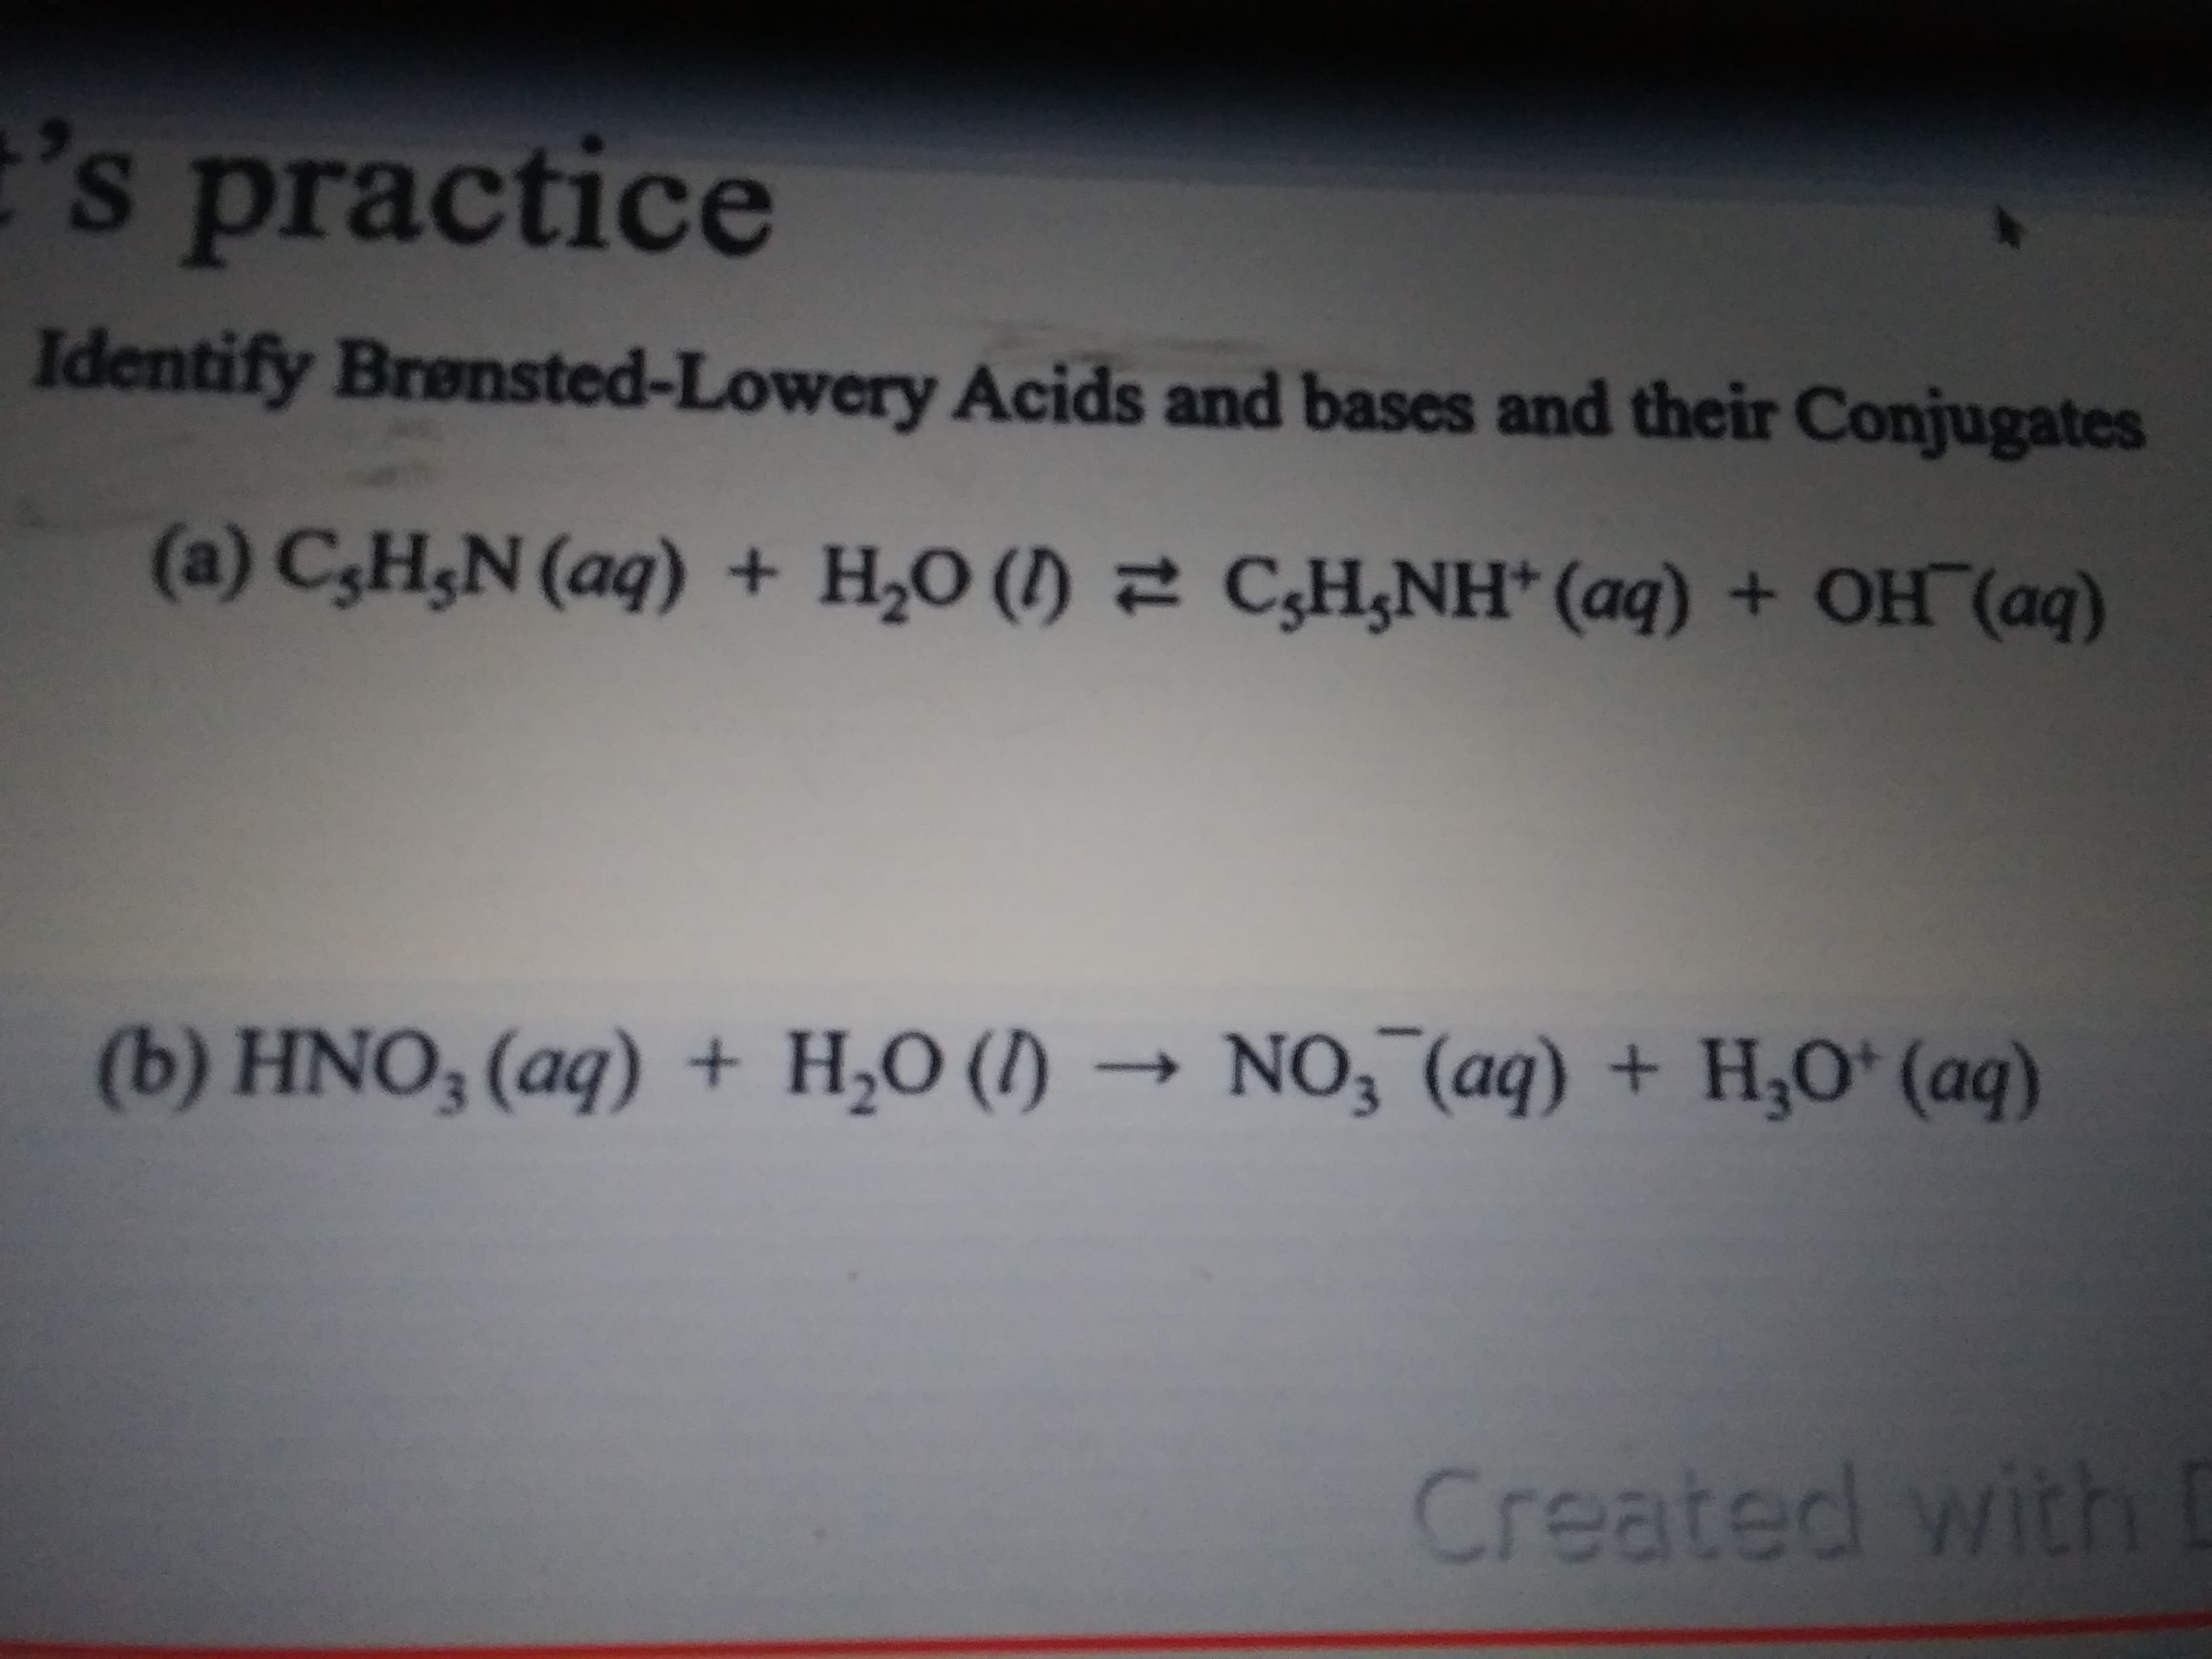 s practice
Identify Brensted-Lowery Acids and bases and their Conjugates
(a) C,H;N (aq) + H,O (I) 2 CH,NH* (aq) + OH (aq)
(b) HNO, (aq) + H,O () → NO, (aq) + H,O* (aq)
Created with D
